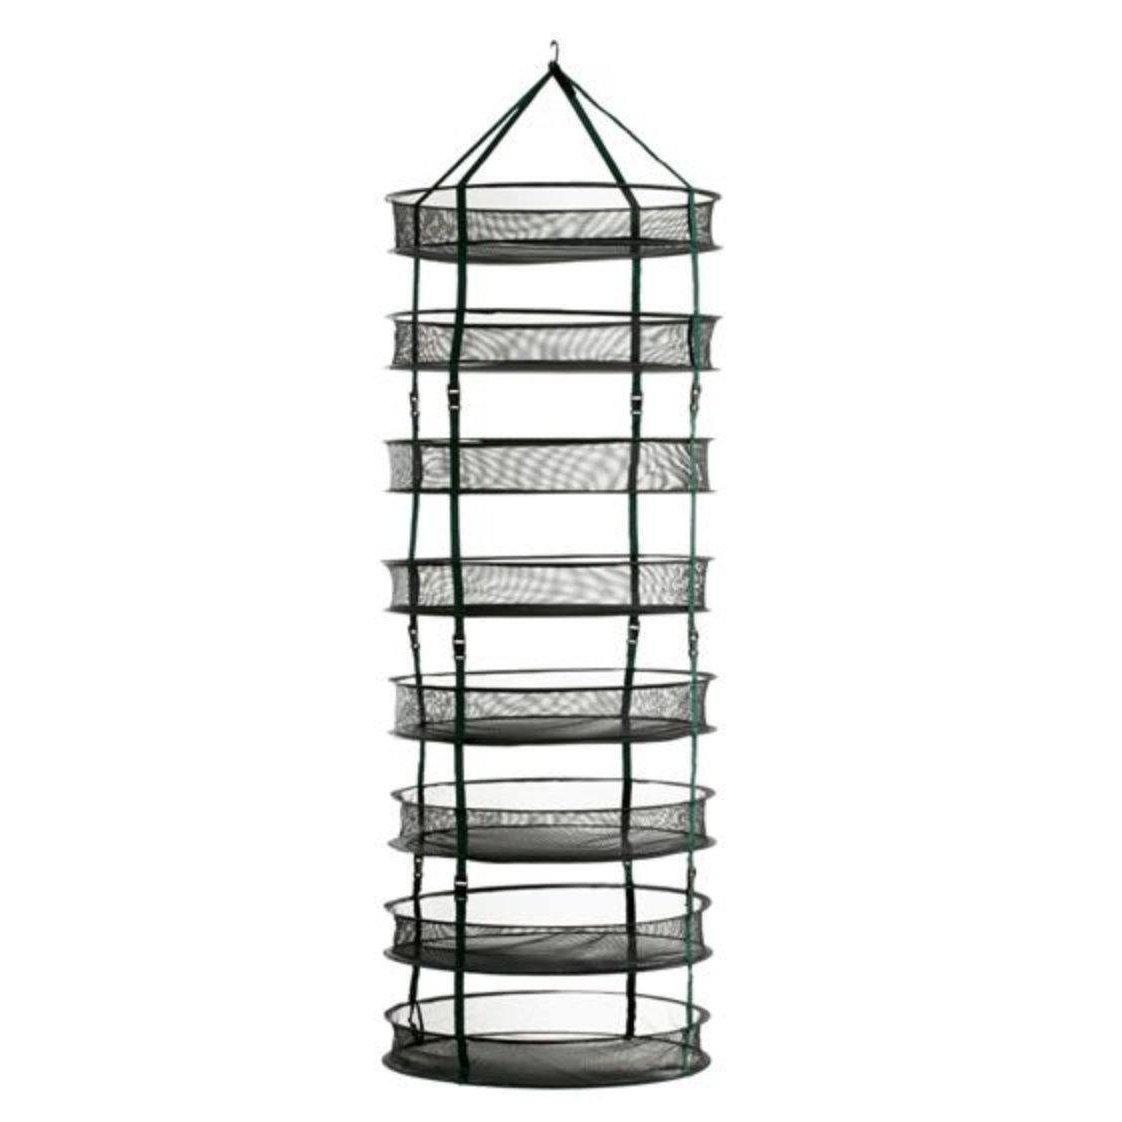 Accessories - STACK!T - Drying Rack w/Clips - 2’ - 638104011426- Gardin Warehouse